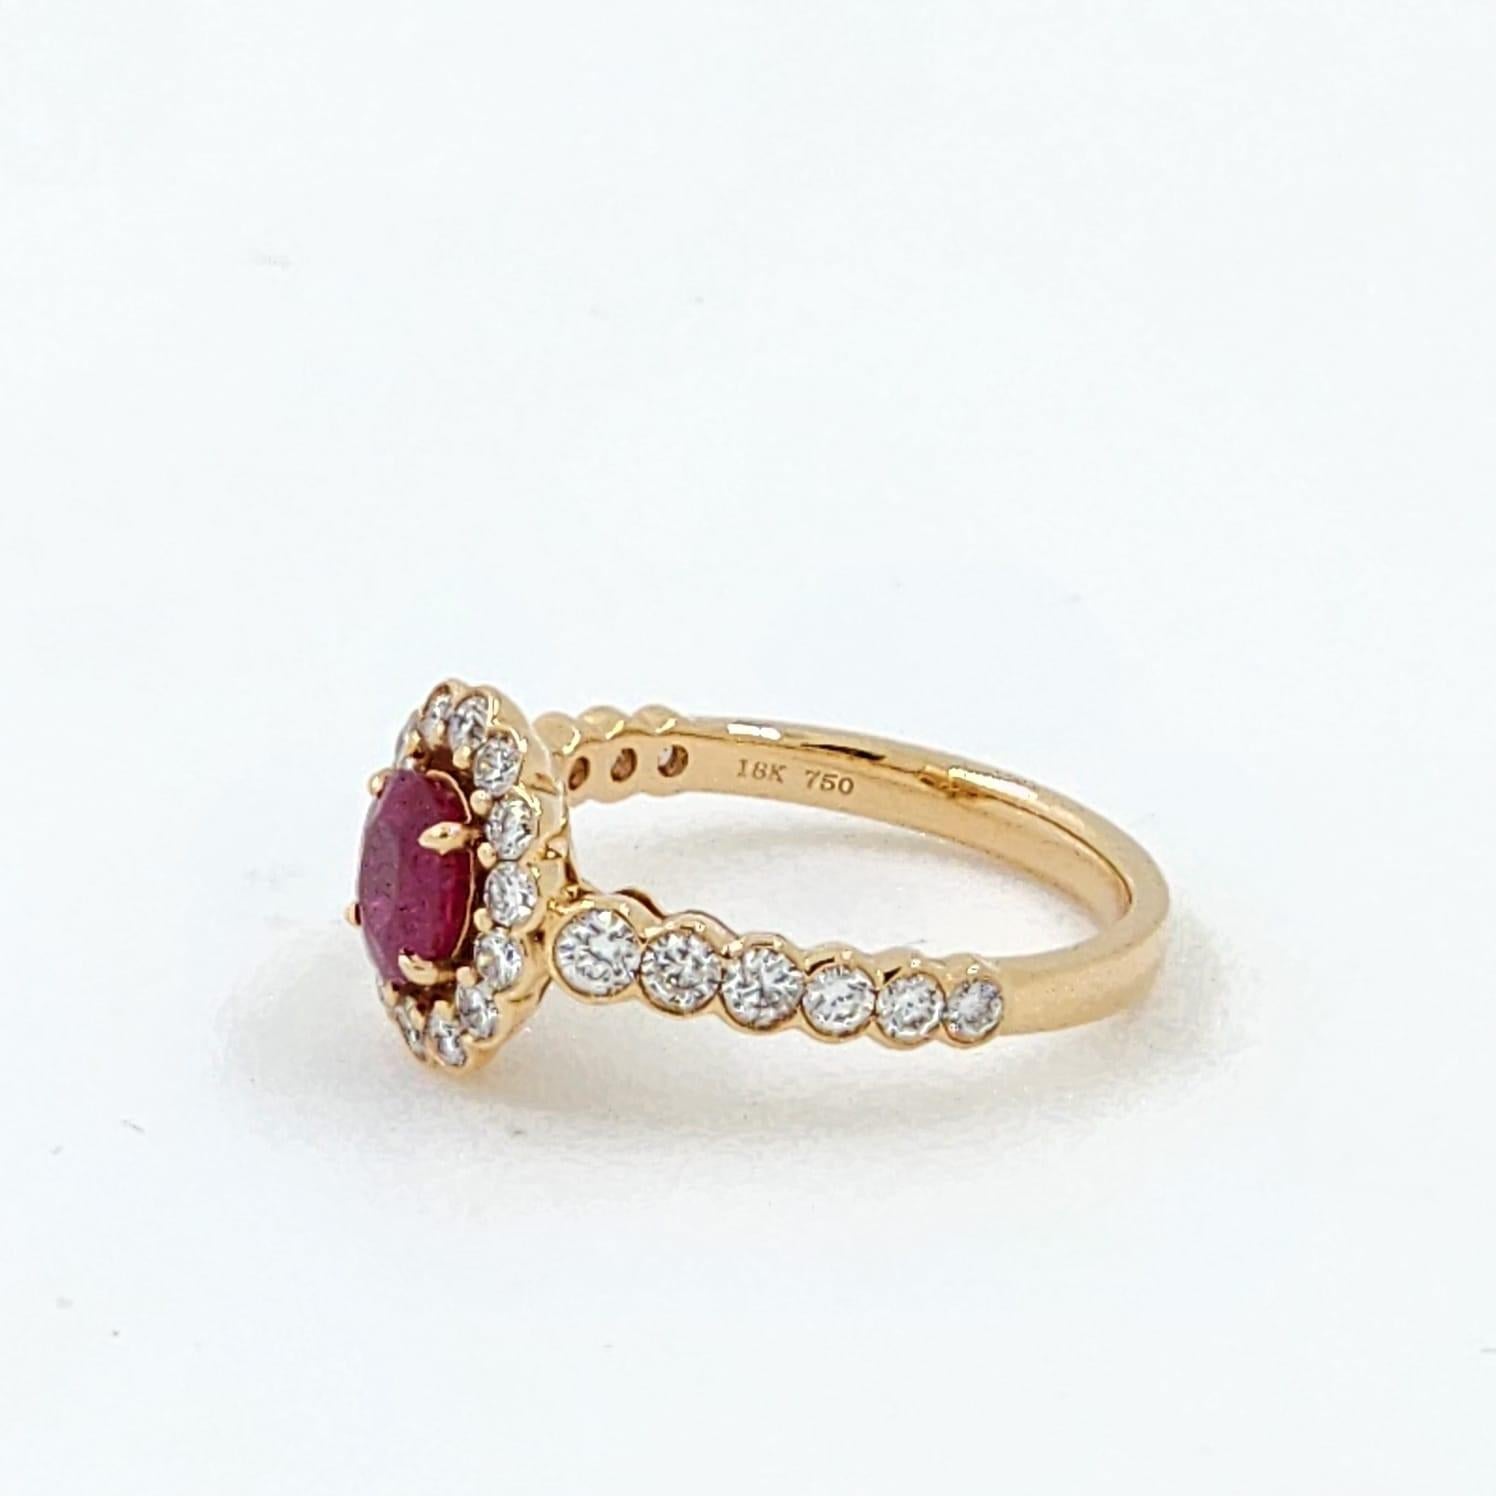 Contemporary IGI 0.82 Carat Ruby Diamond Ring in 18K Rose Gold For Sale